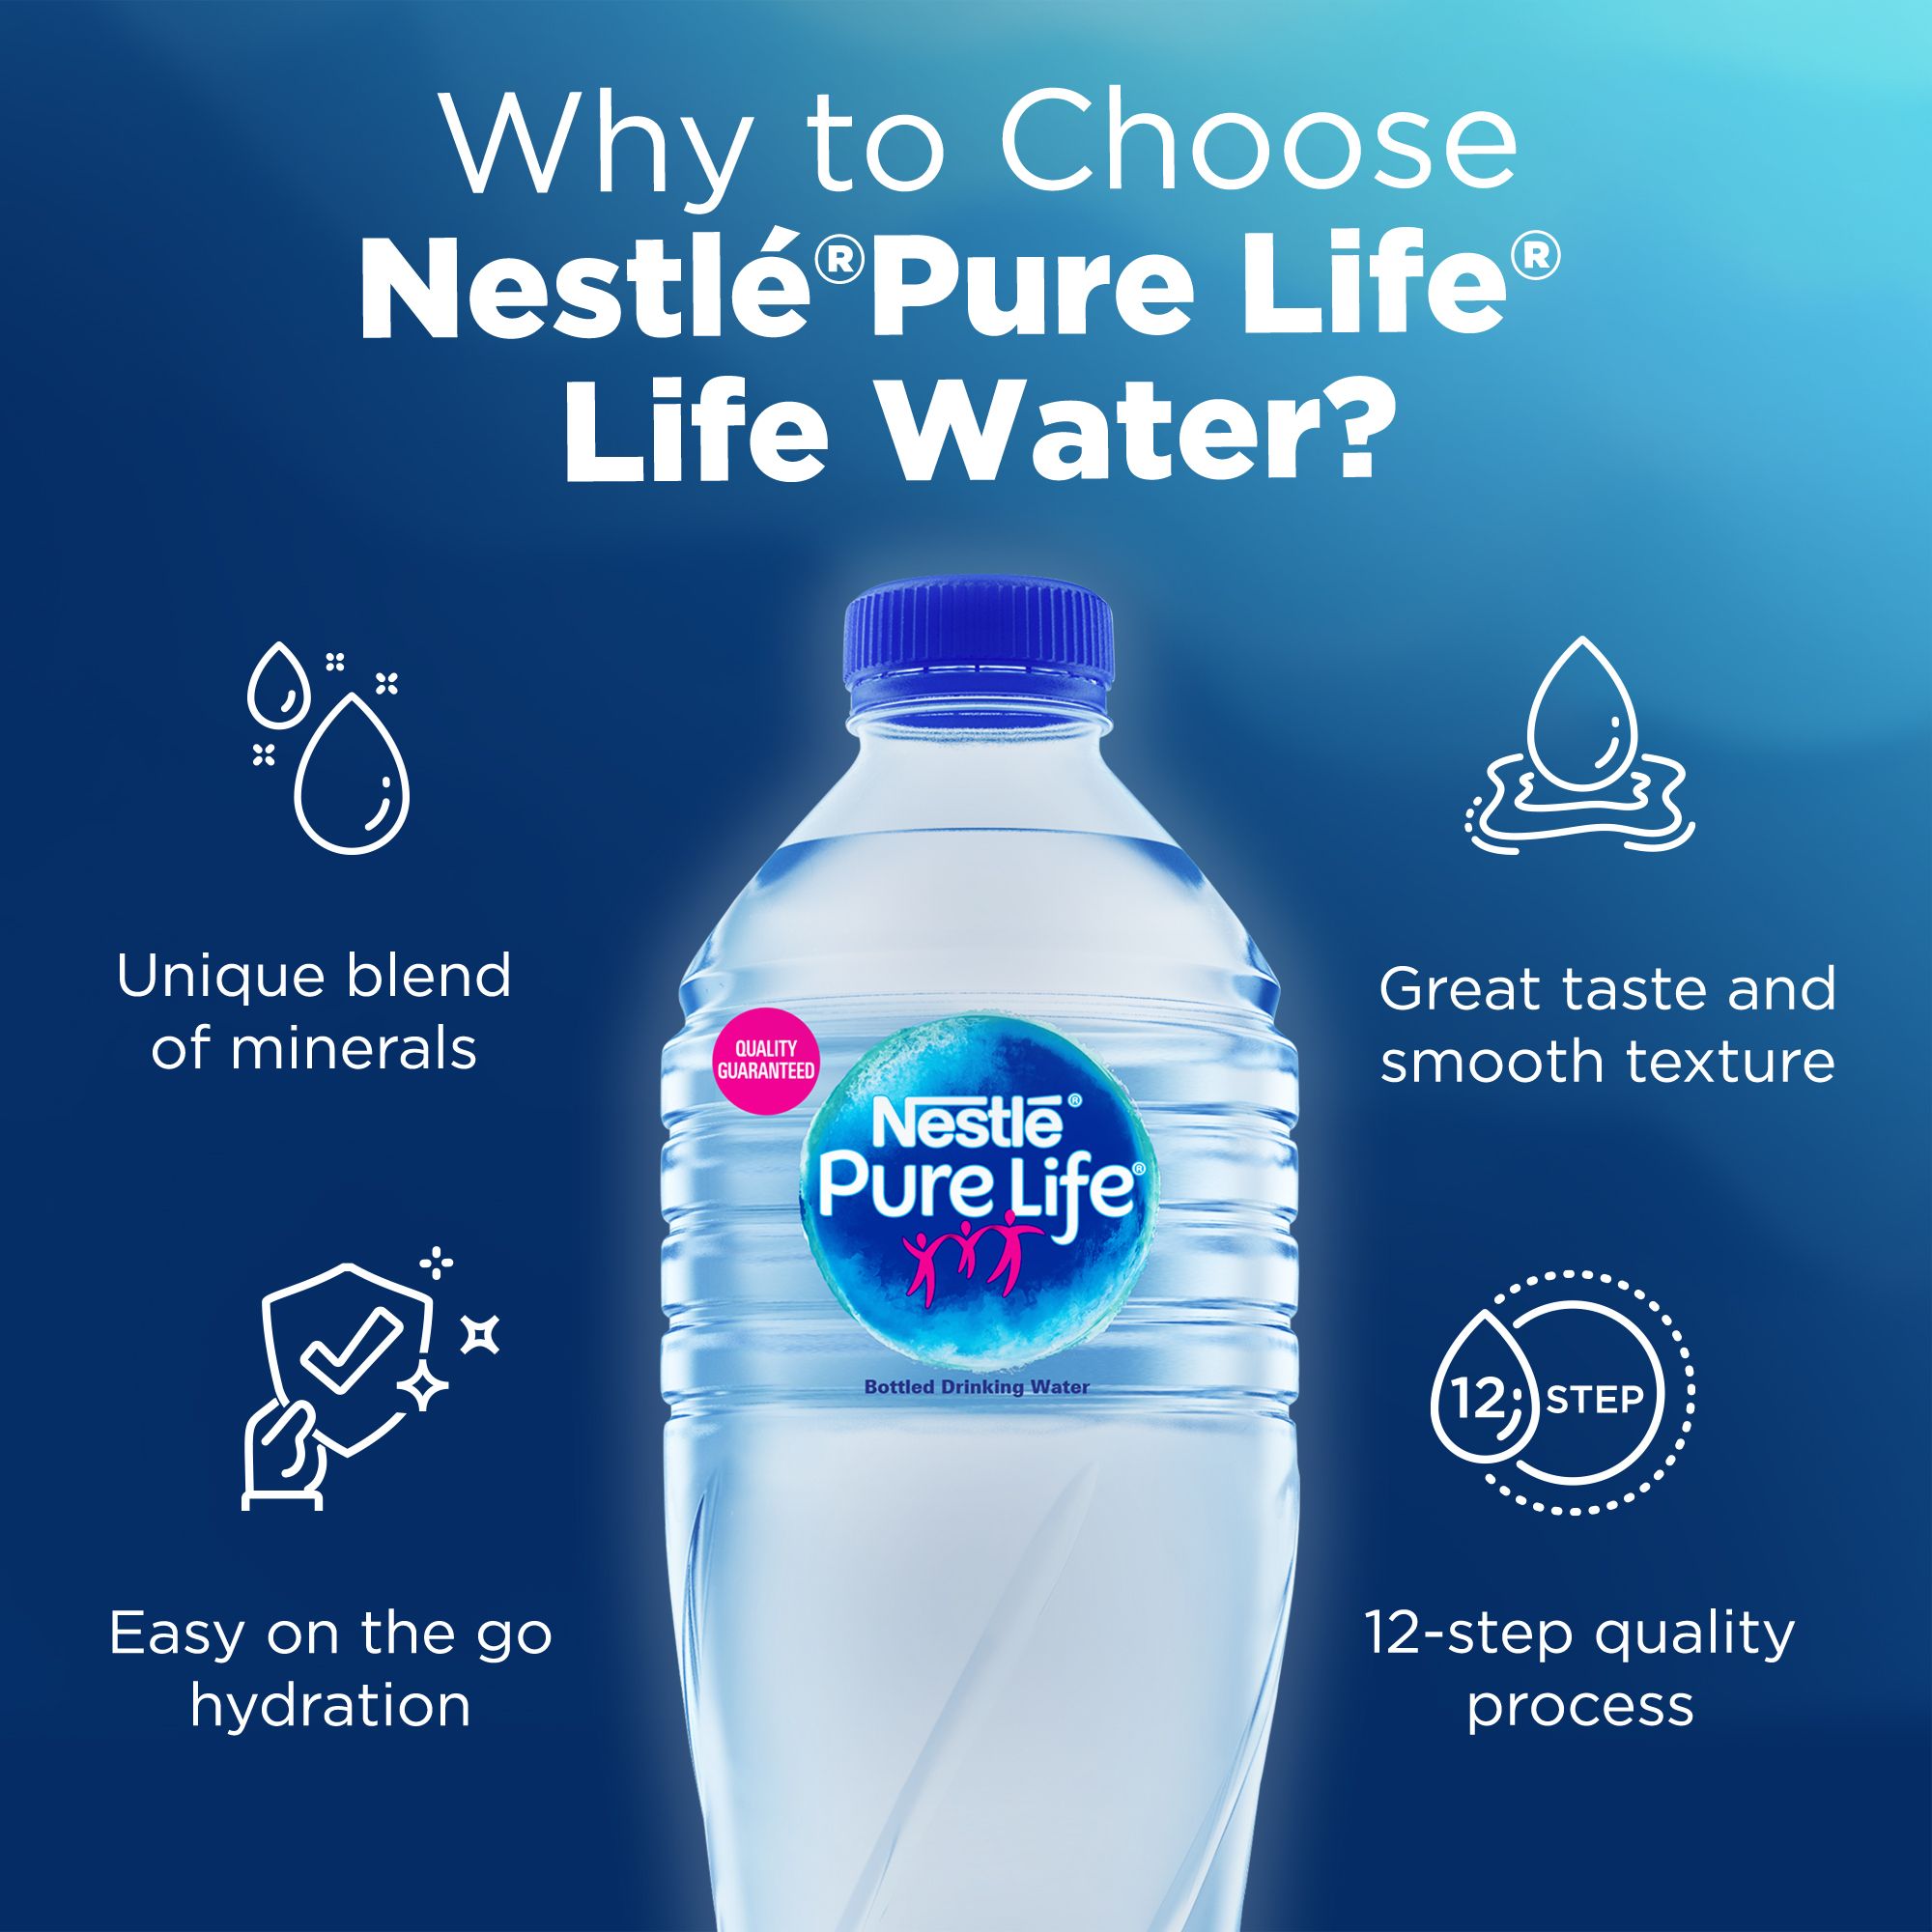 Nestlé Pure Life Low Sodium Bottled Drinking Water 12x600ml